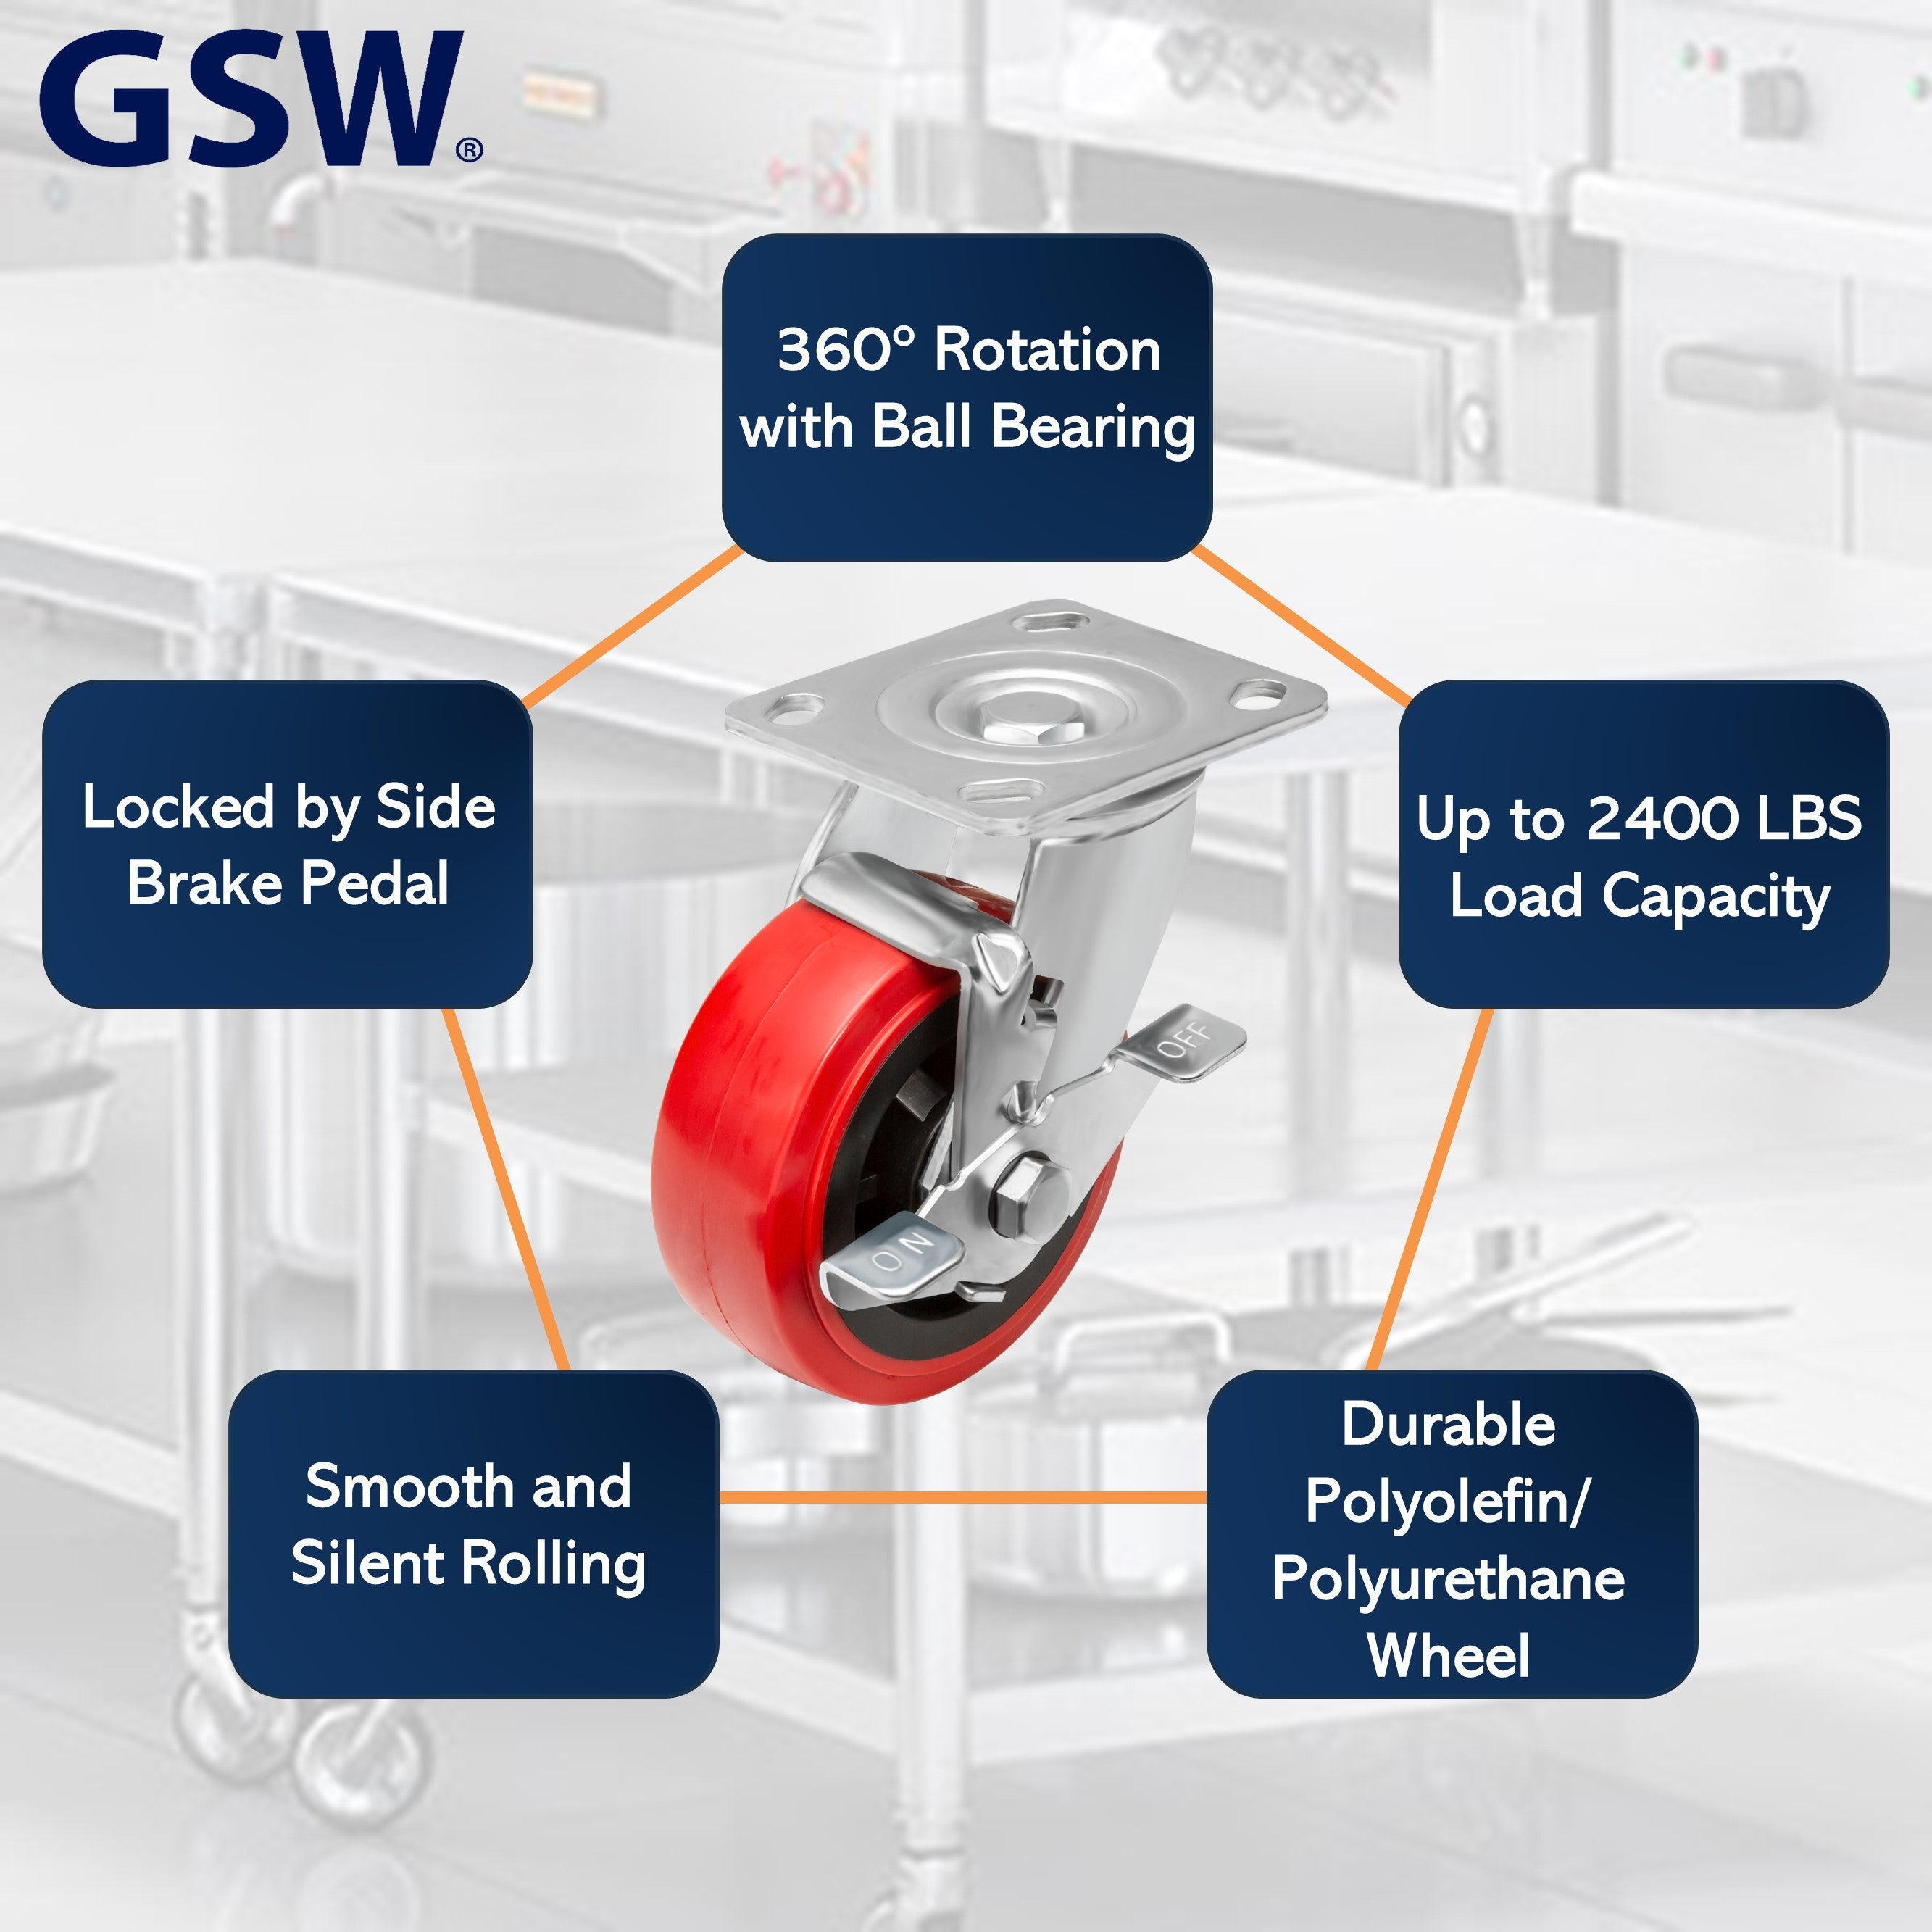 GSW 5" Industrial Casters - Heavy Duty Casters, Set of 4 Plate Casters with Loading Capacity of 2400 Lbs, Use for Heavy Equipment, Carts, and Workbench (2 Swivels and 2 Brakes)